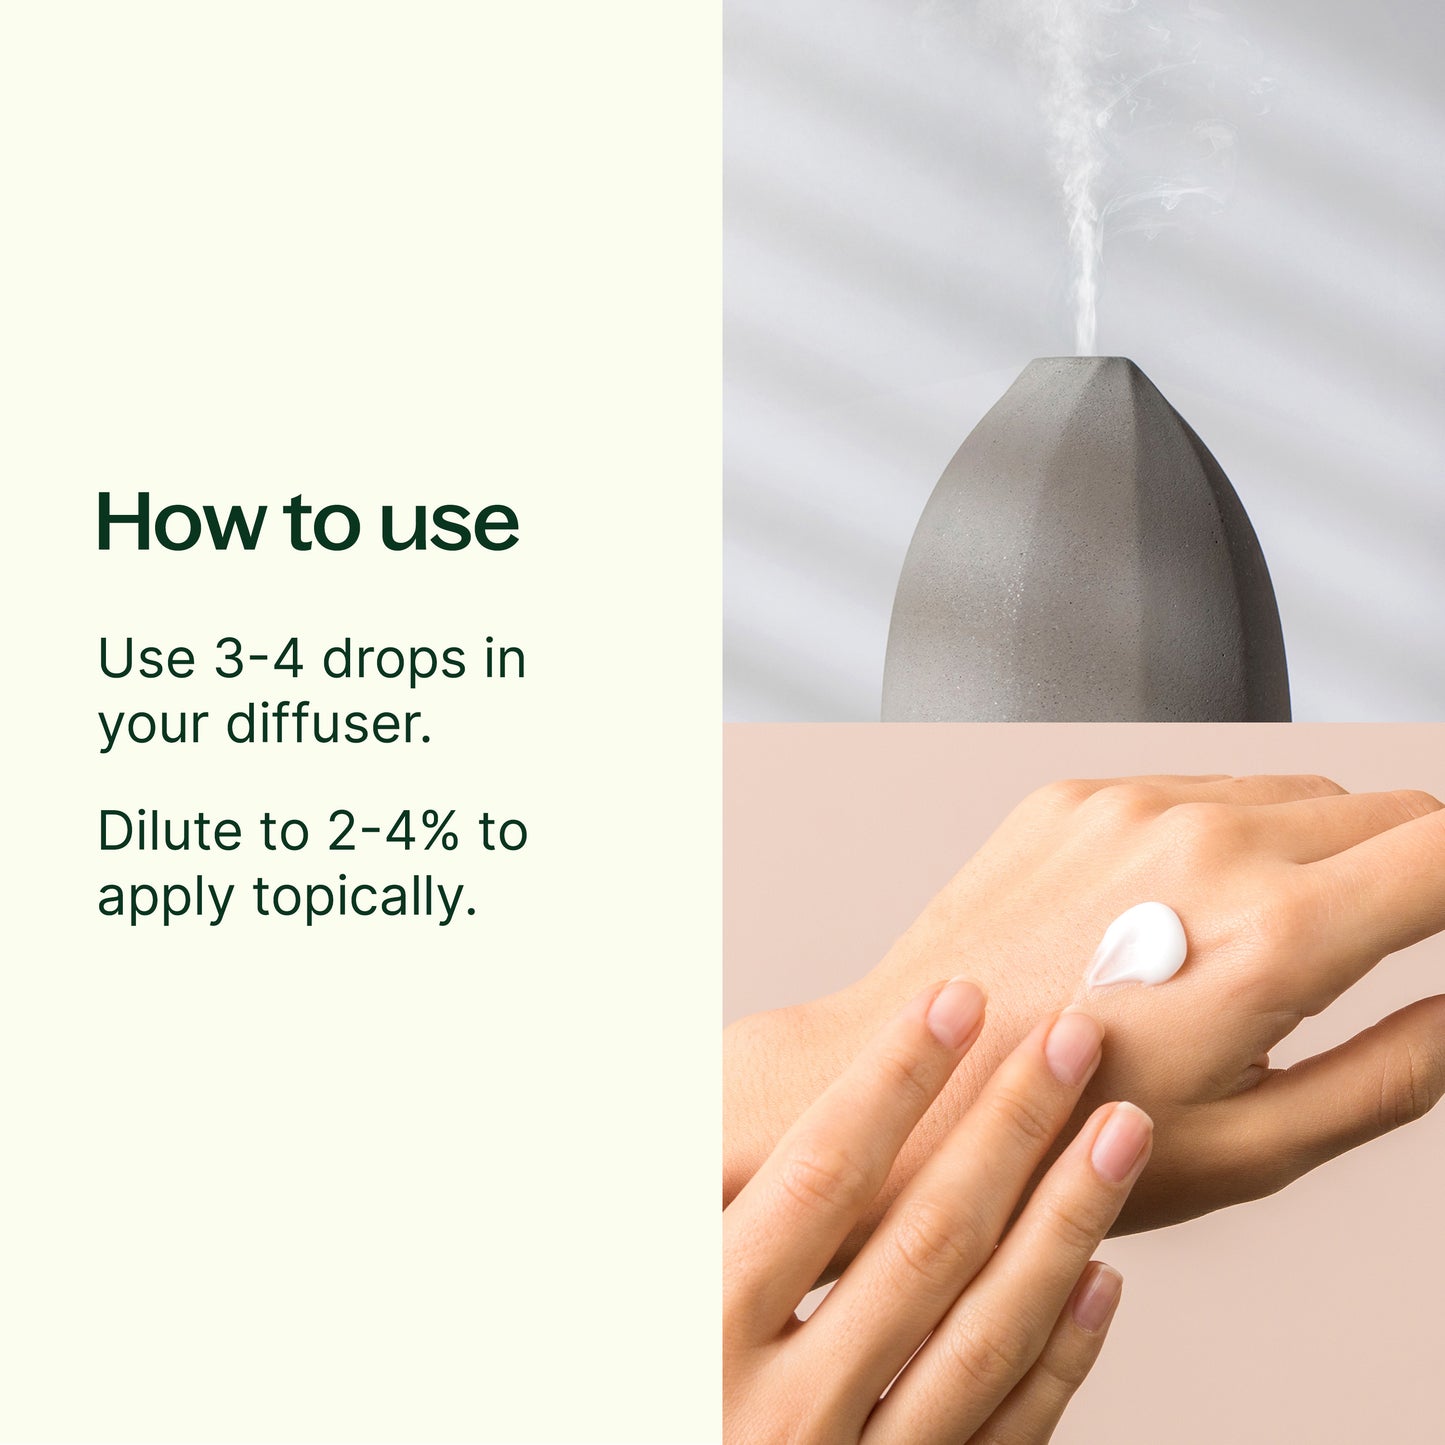 How to use: 3-4 drops in your diffuser. Dilute to 2-4% to apply topically